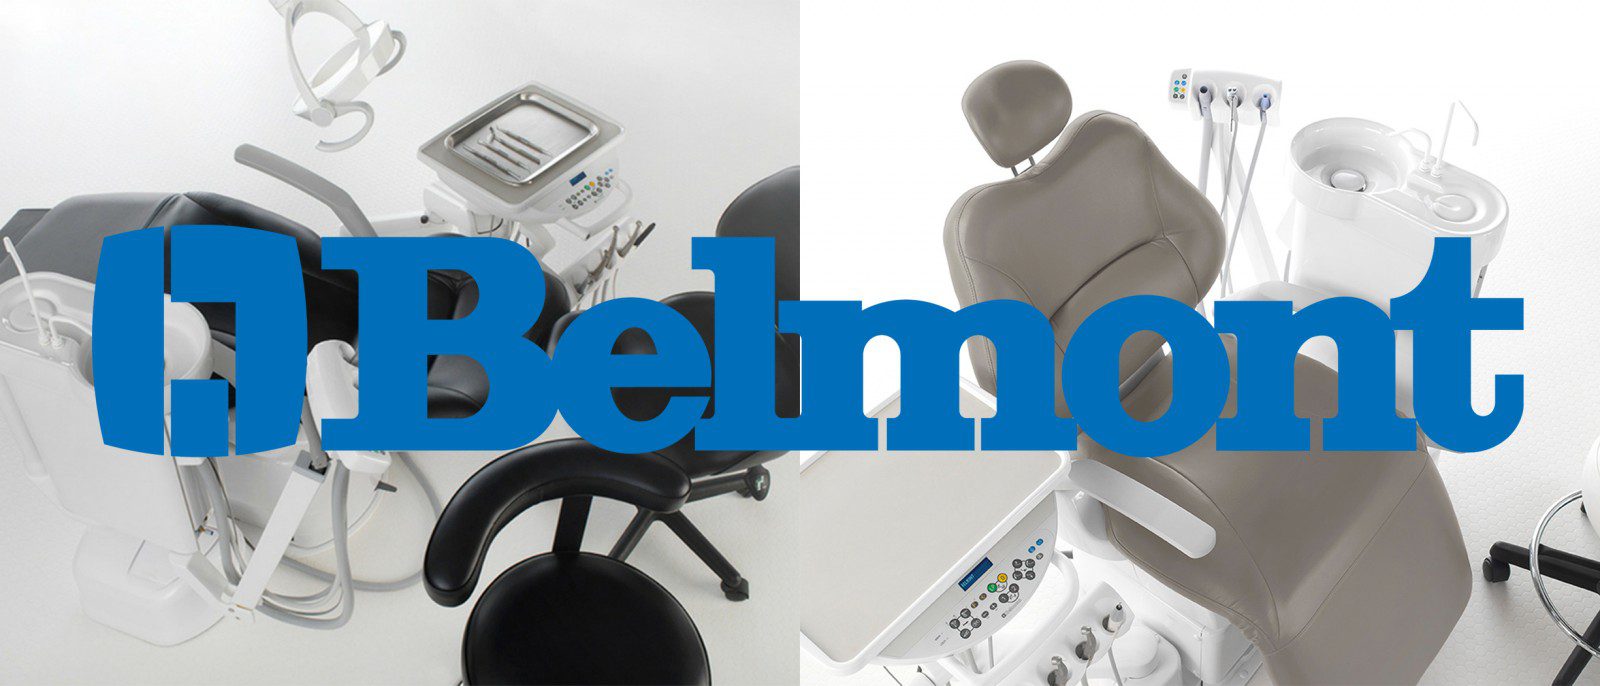 belmont dental chairs in stock